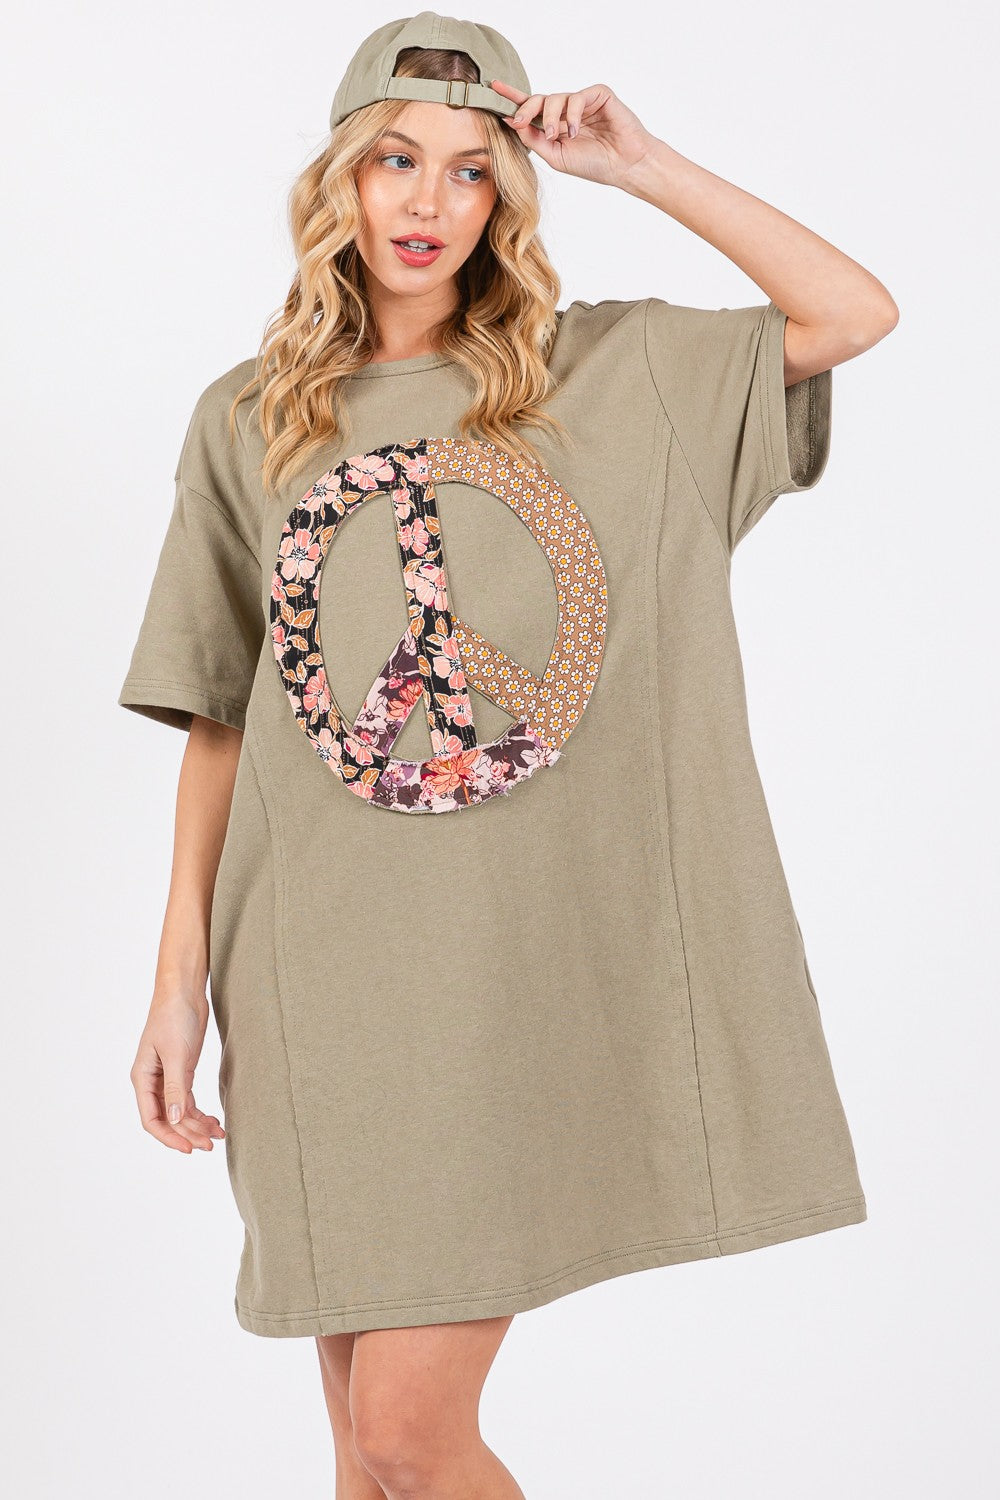 Sunset and Swim  Full Size Peace Sign Applique Short Sleeve Tee Dress Sunset and Swim Olive Drab S 